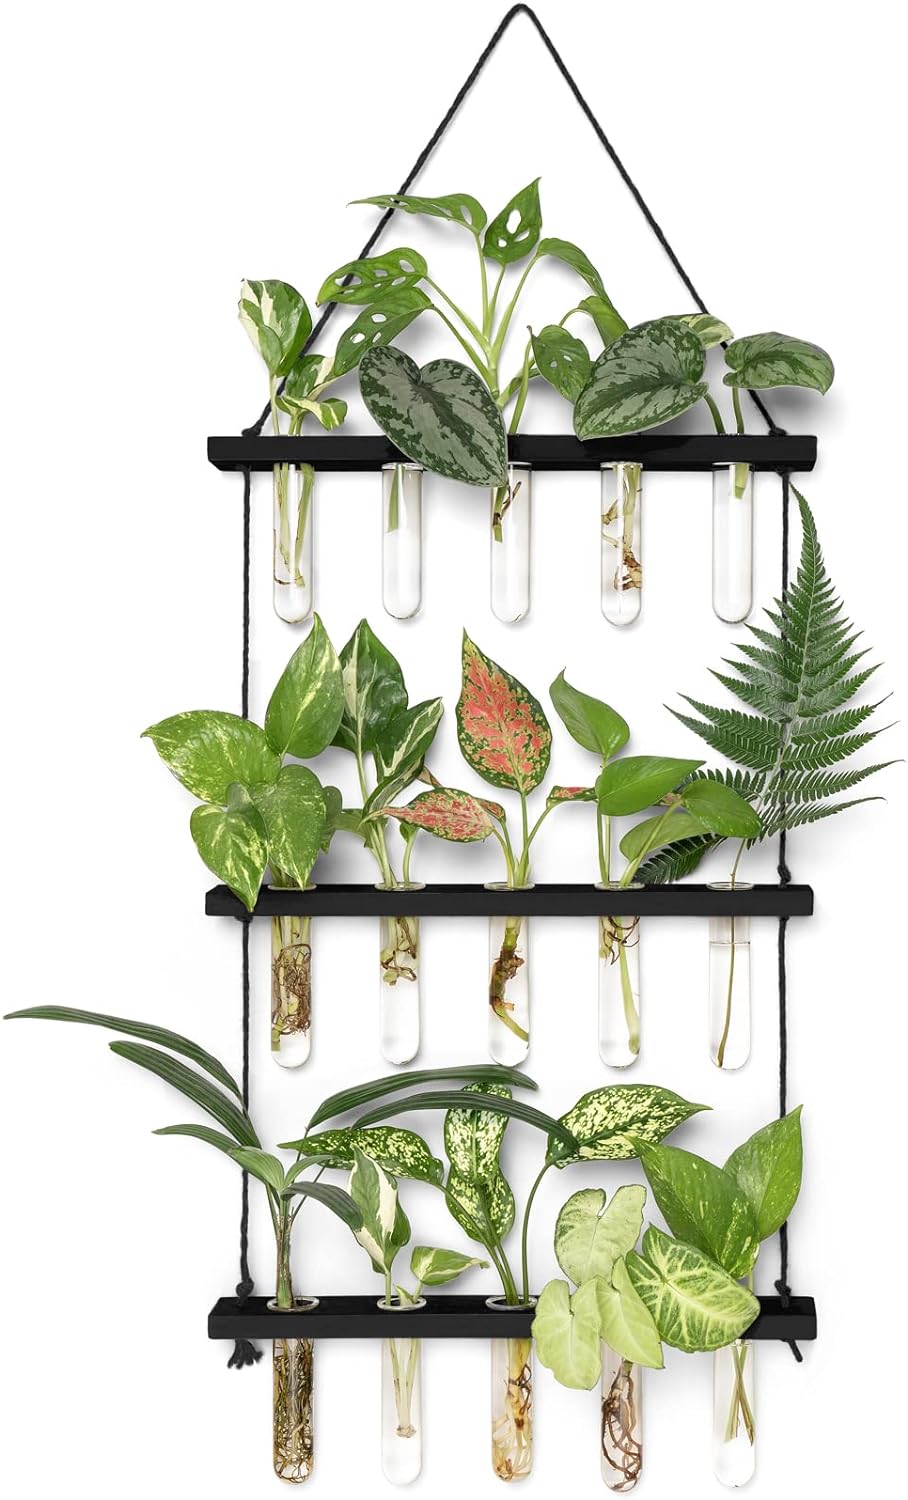 Mkono Plant Propagation Tubes, 3 Tiered Wall Hanging Plant Terrarium with Wooden Stand Mini Test Tube Flower Vase Glass Planter for Hydroponic Plant Cutting Home Garden Office Decor Plant Lover Gift